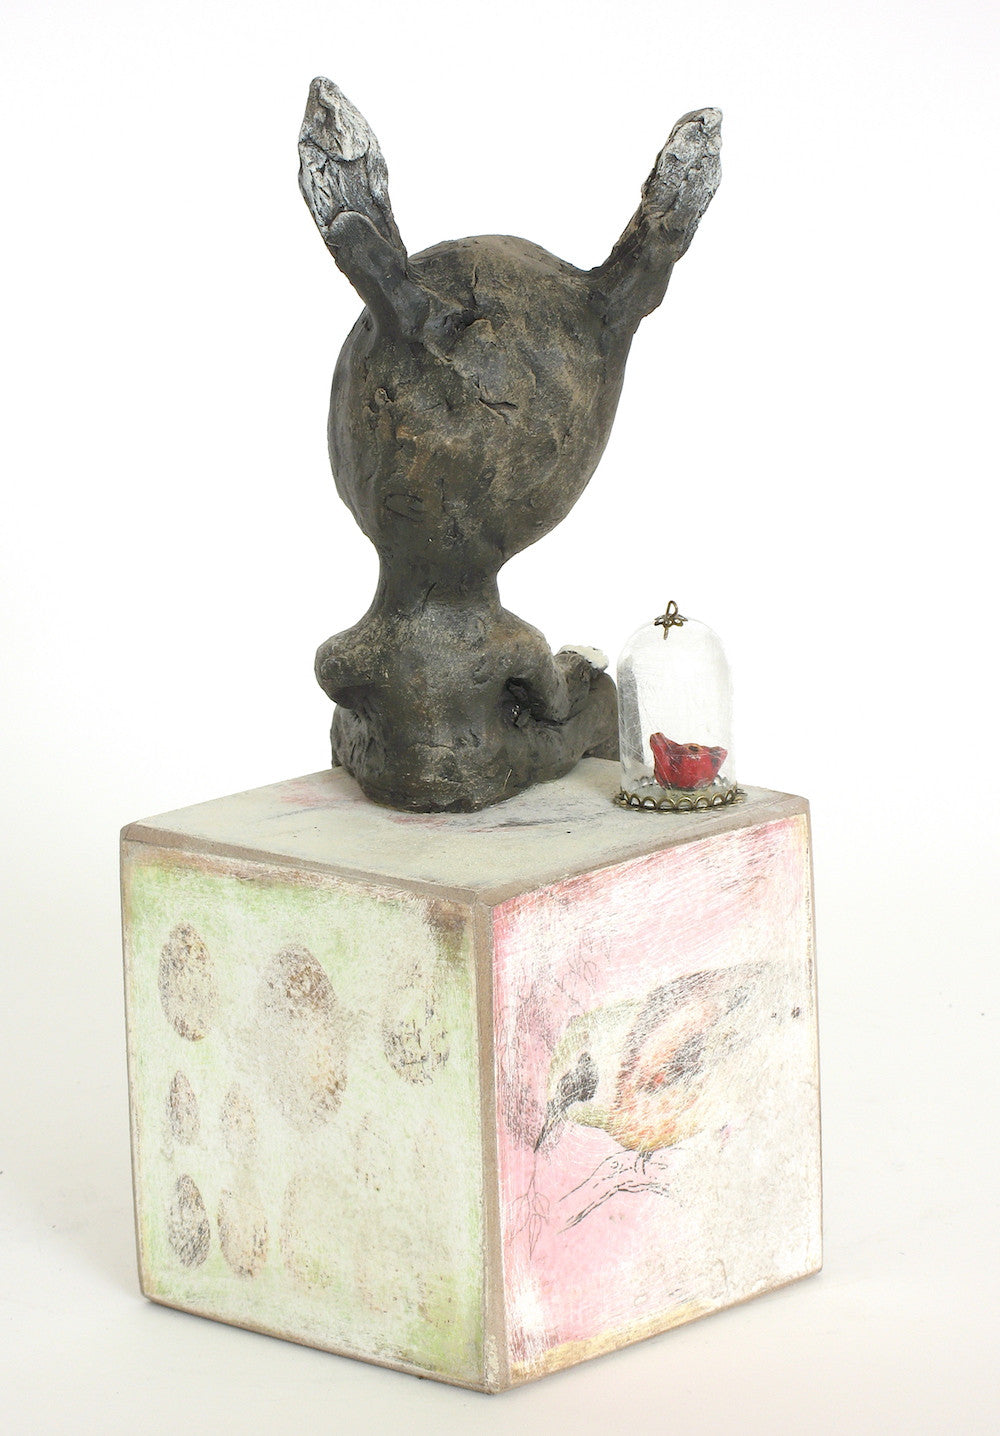 SOLD   "In Case of Emergency, Break the Glass"  original ceramic sculpture with mixed media by Jacquline Hurlbert